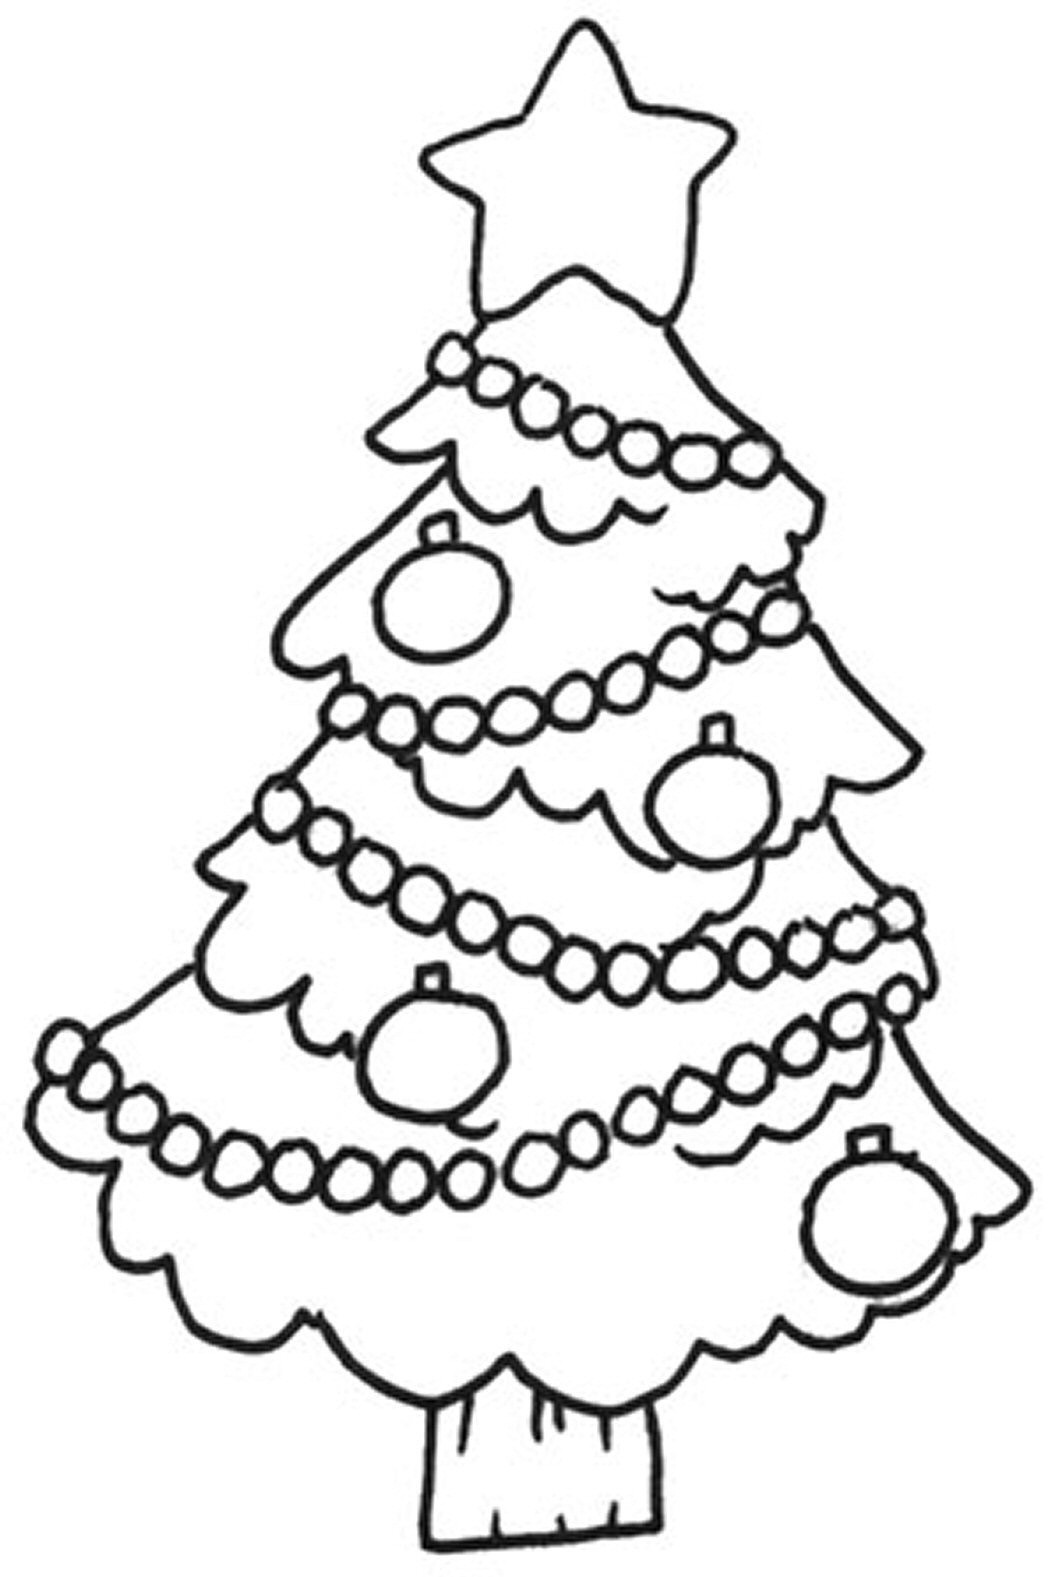 Christmas Tree Coloring Sheets For Kids
 Free Printable Christmas Tree Coloring Pages For Kids